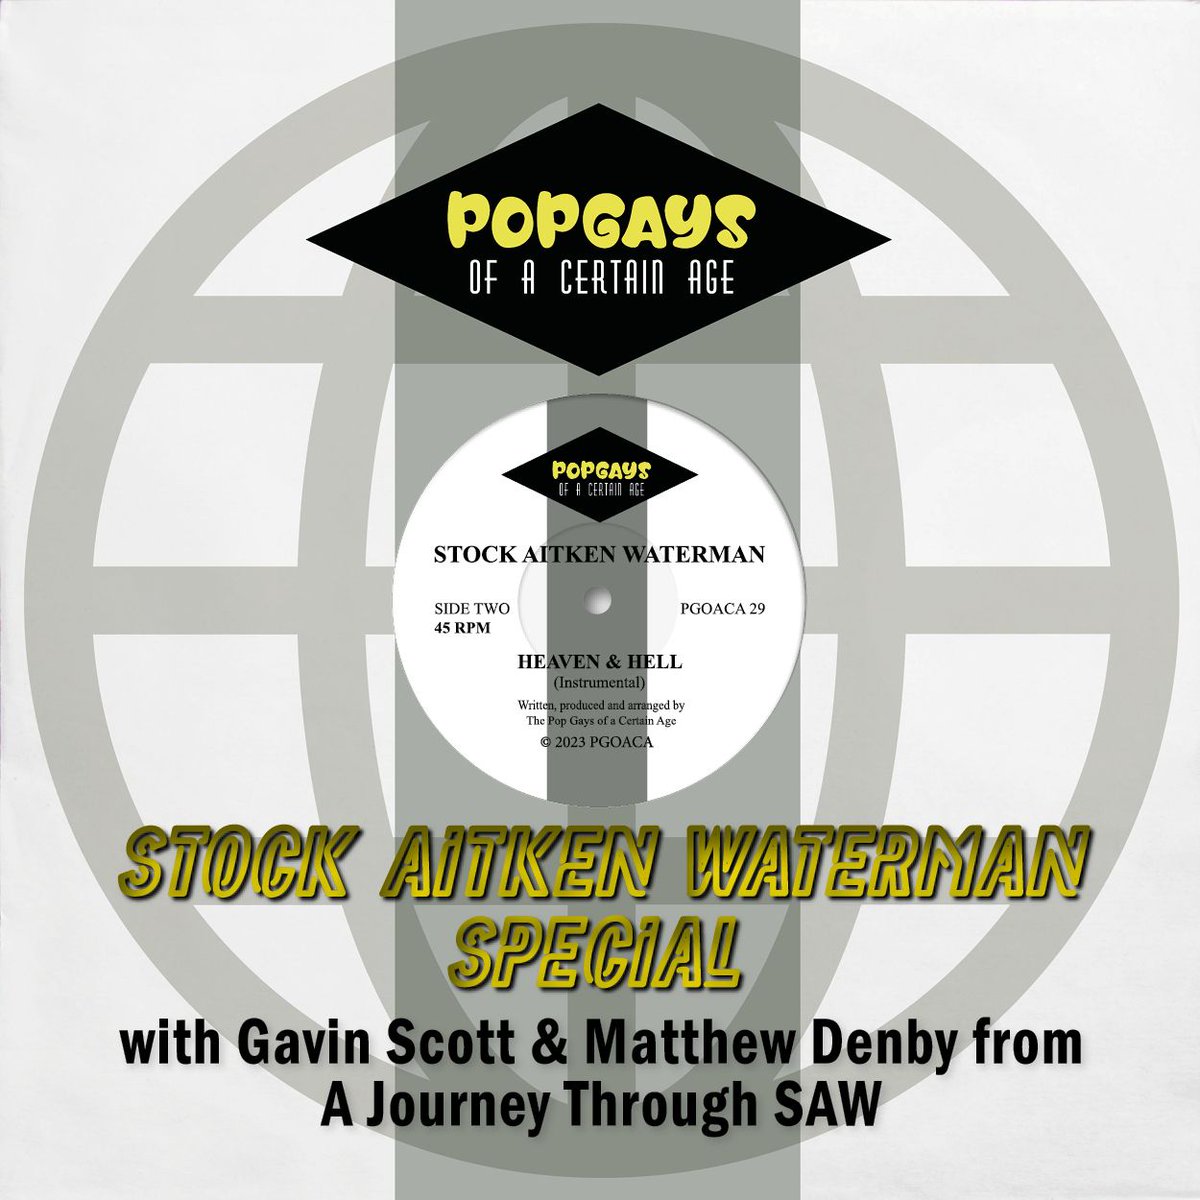 The P-p-p-Pop Gays are back with part 2 of the #StockAitkenWaterman special with special guests @gavinscott99 & @MrMattDenby from the fabulous ‘A Journey Through SAW' @ChartBeatsAU podcast

pod.link/1584676497/epi…